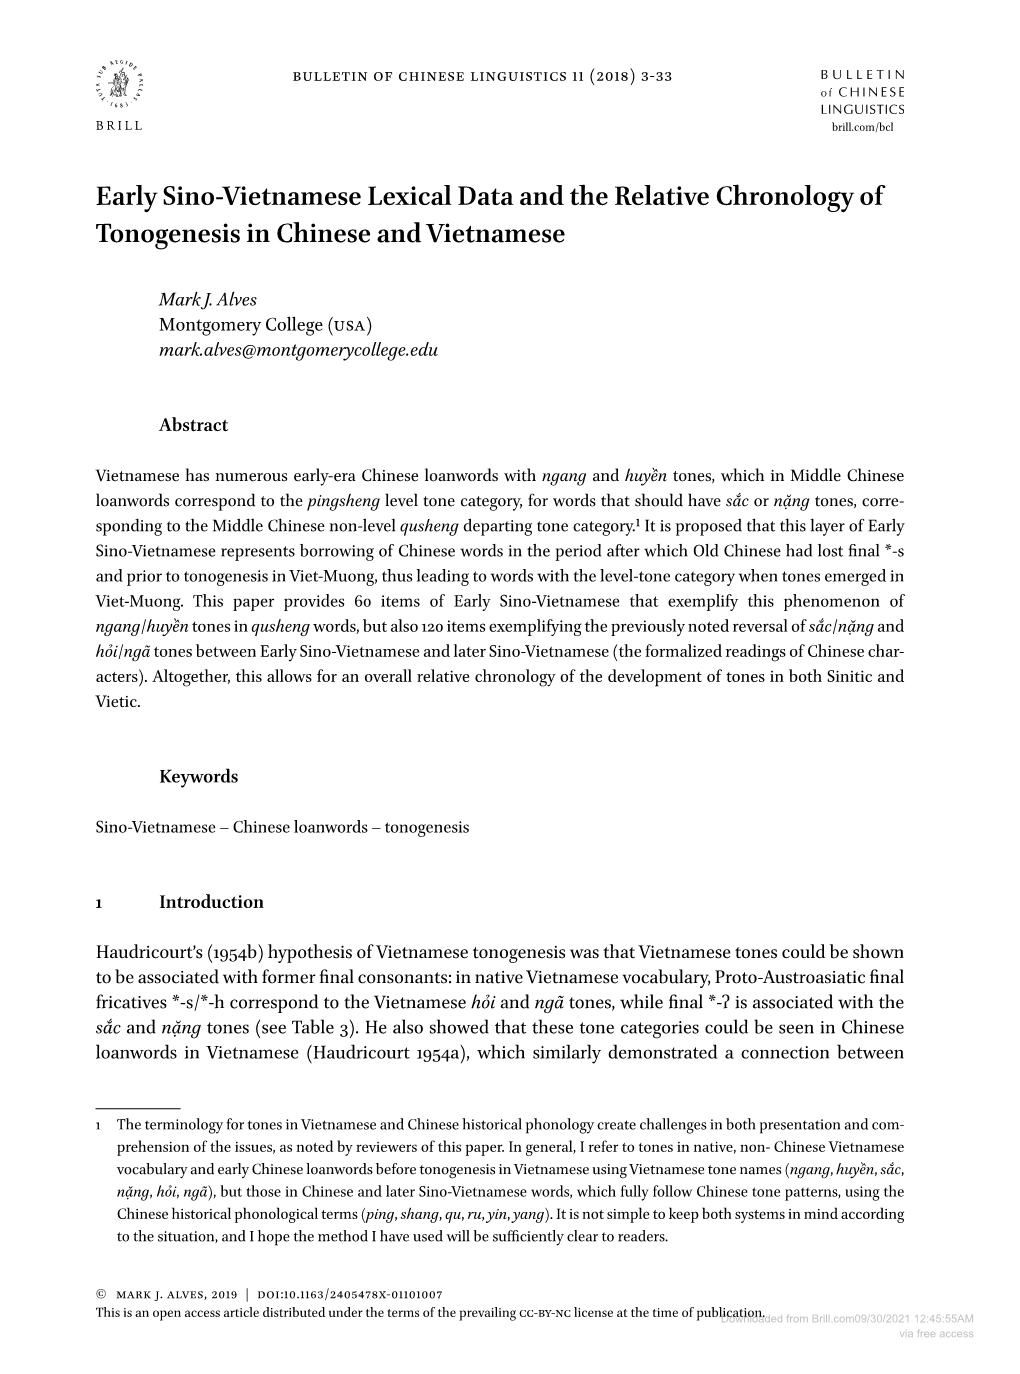 Early Sino-Vietnamese Lexical Data and the Relative Chronology of Tonogenesis in Chinese and Vietnamese